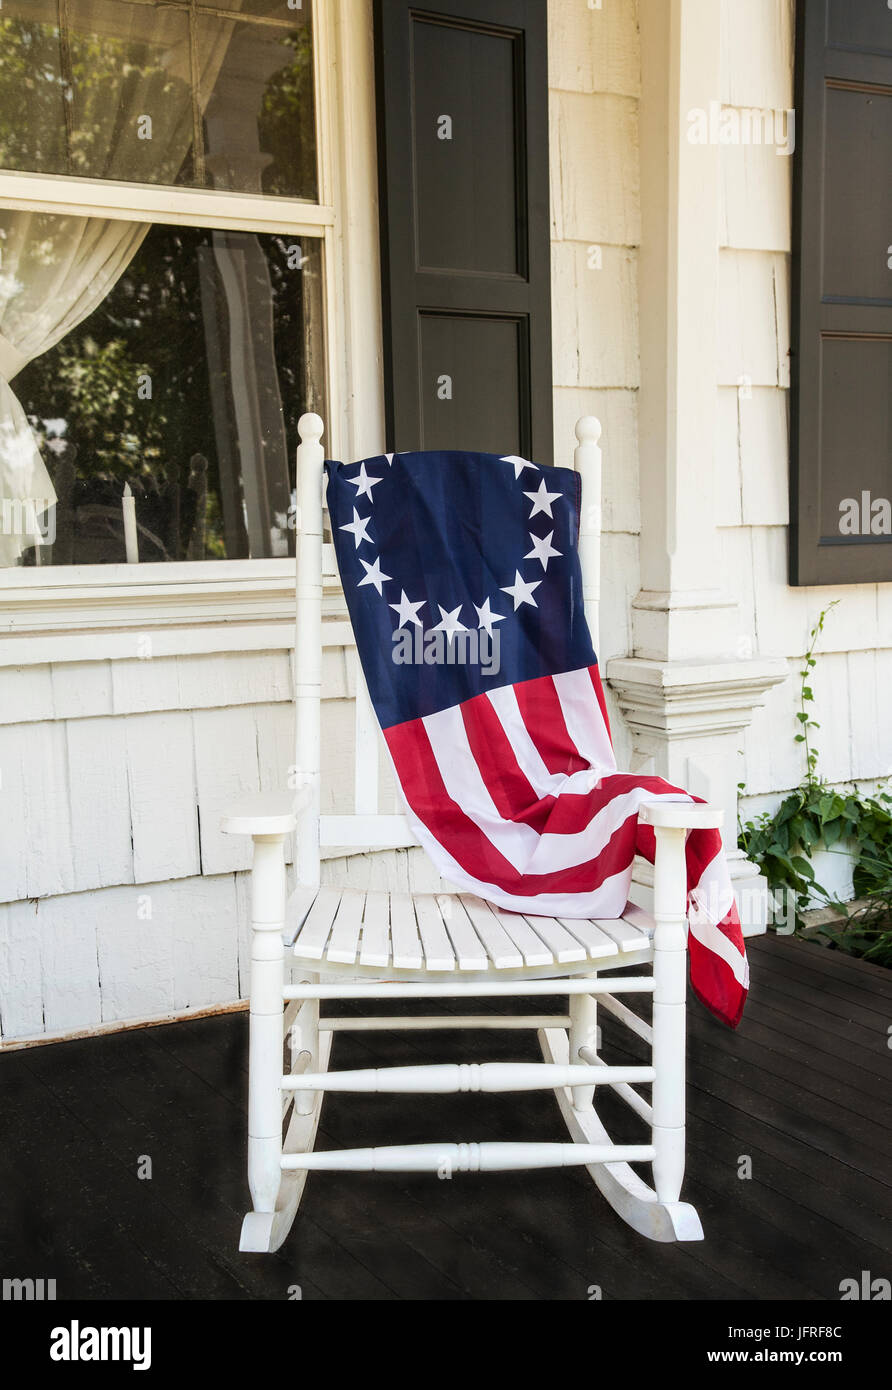 Betsy Ross flag 13 stars on a wood rocking chair, historical farm house  front porch furniture in Freehold Township, New Jersey, USA, US flag 2017 Stock Photo